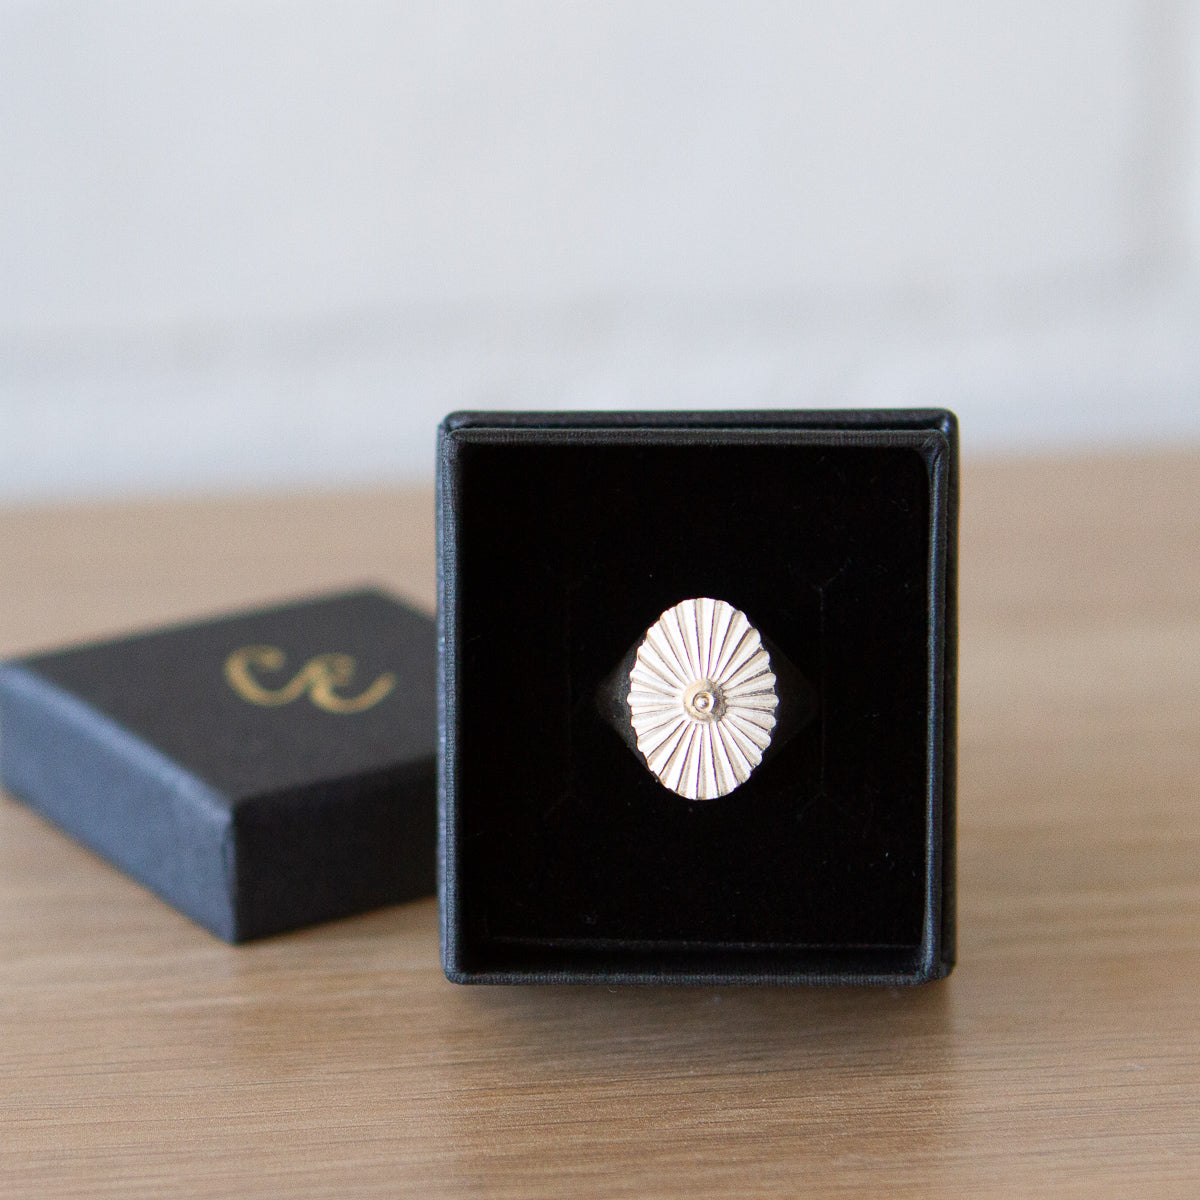 Large silver oval signet ring with a carved sunburst pattern and a silver bead center in a gift box